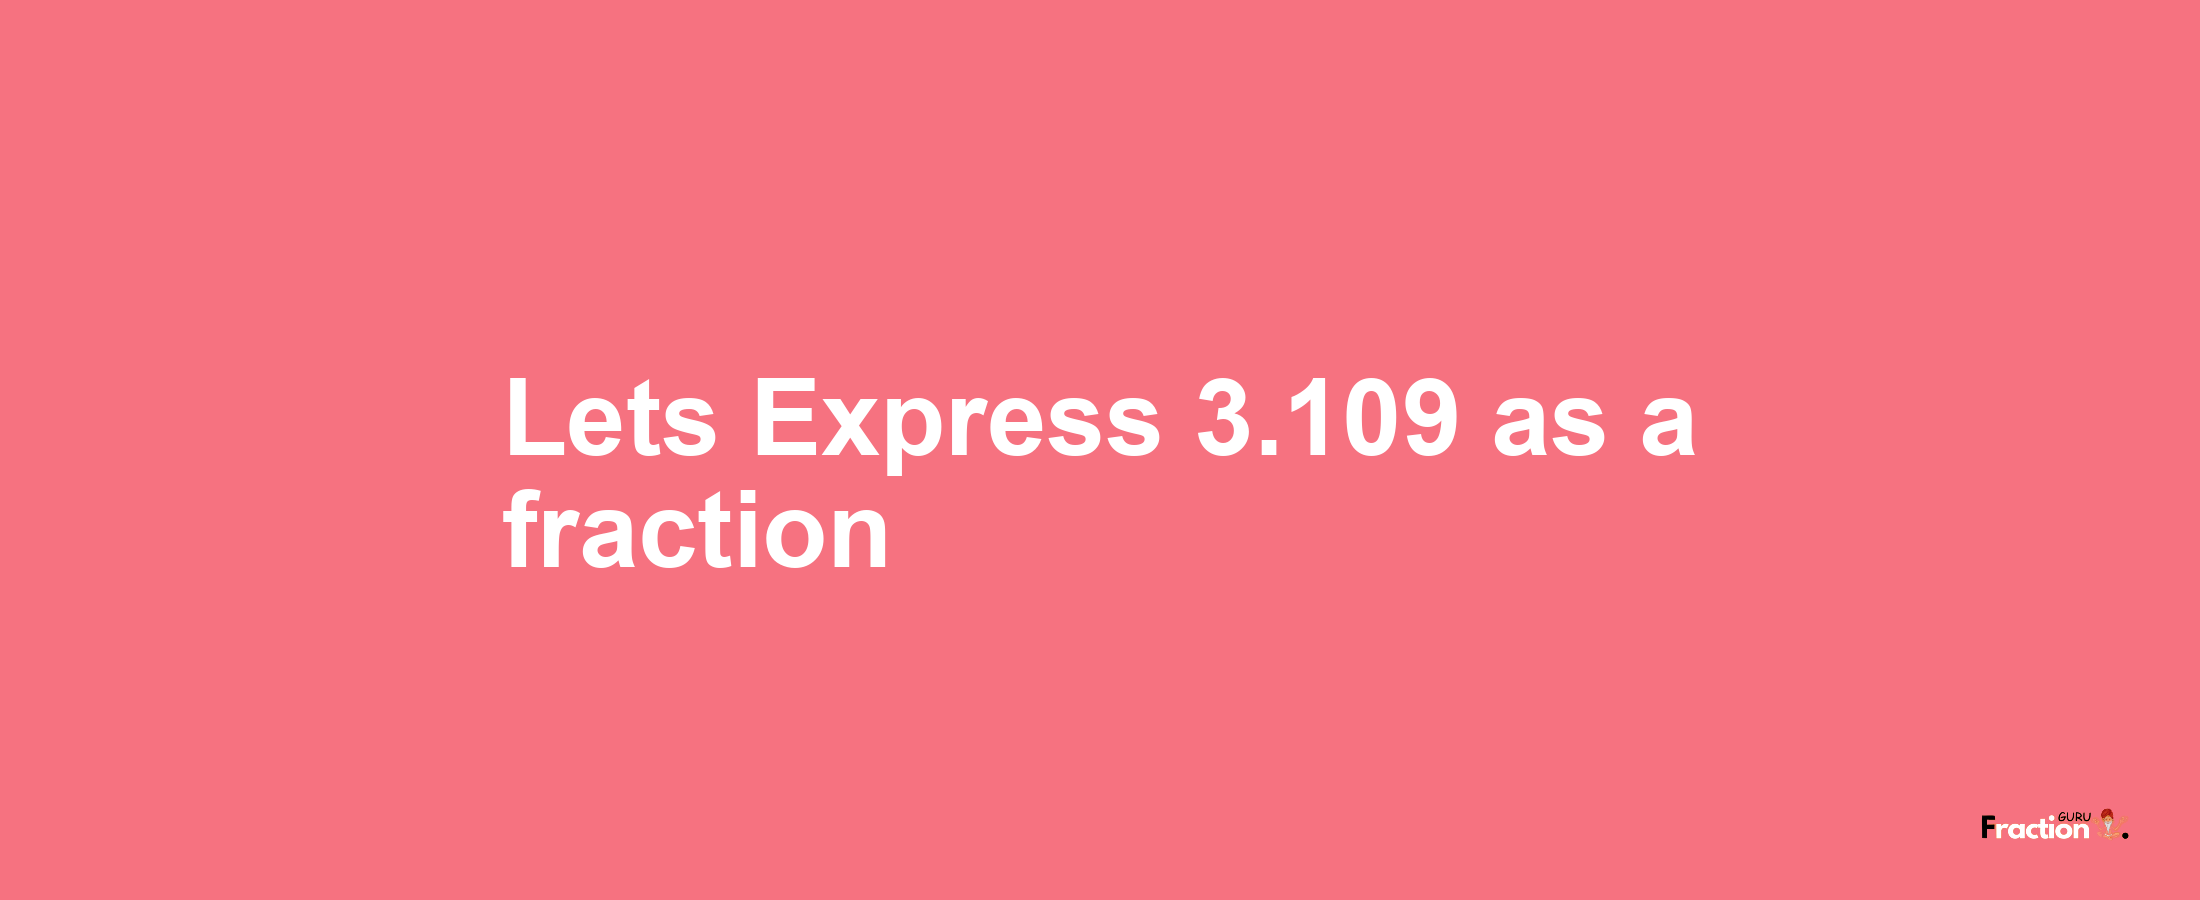 Lets Express 3.109 as afraction